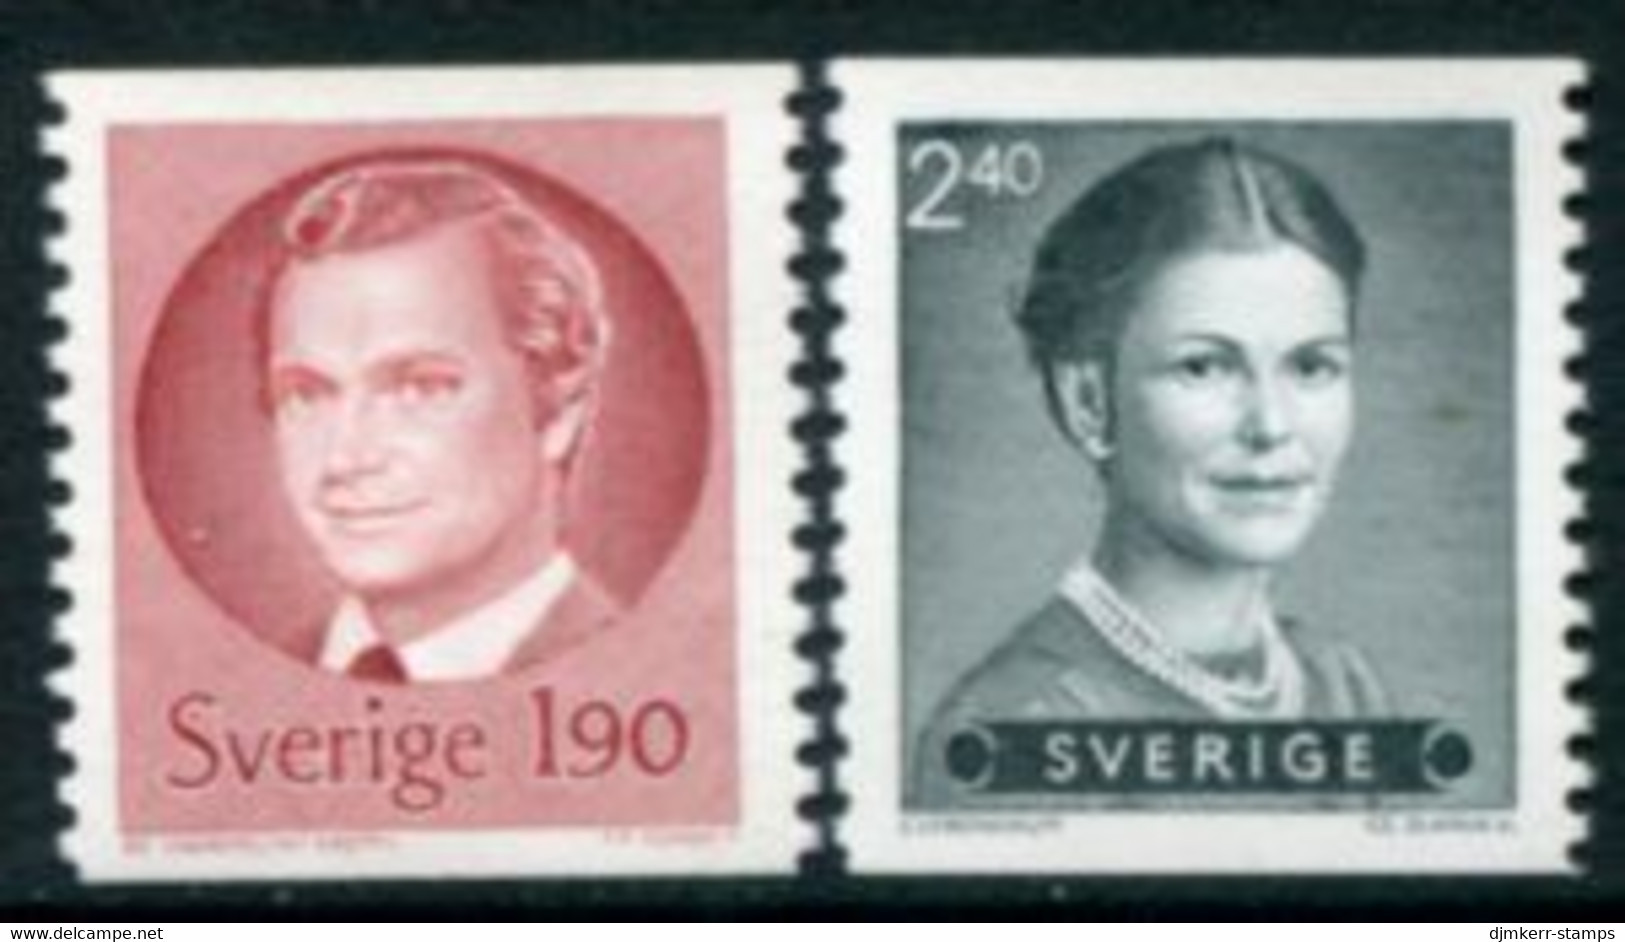 SWEDEN 1984 Definitive: King And Queen MNH / **.  Michel 1276-77 - Nuovi